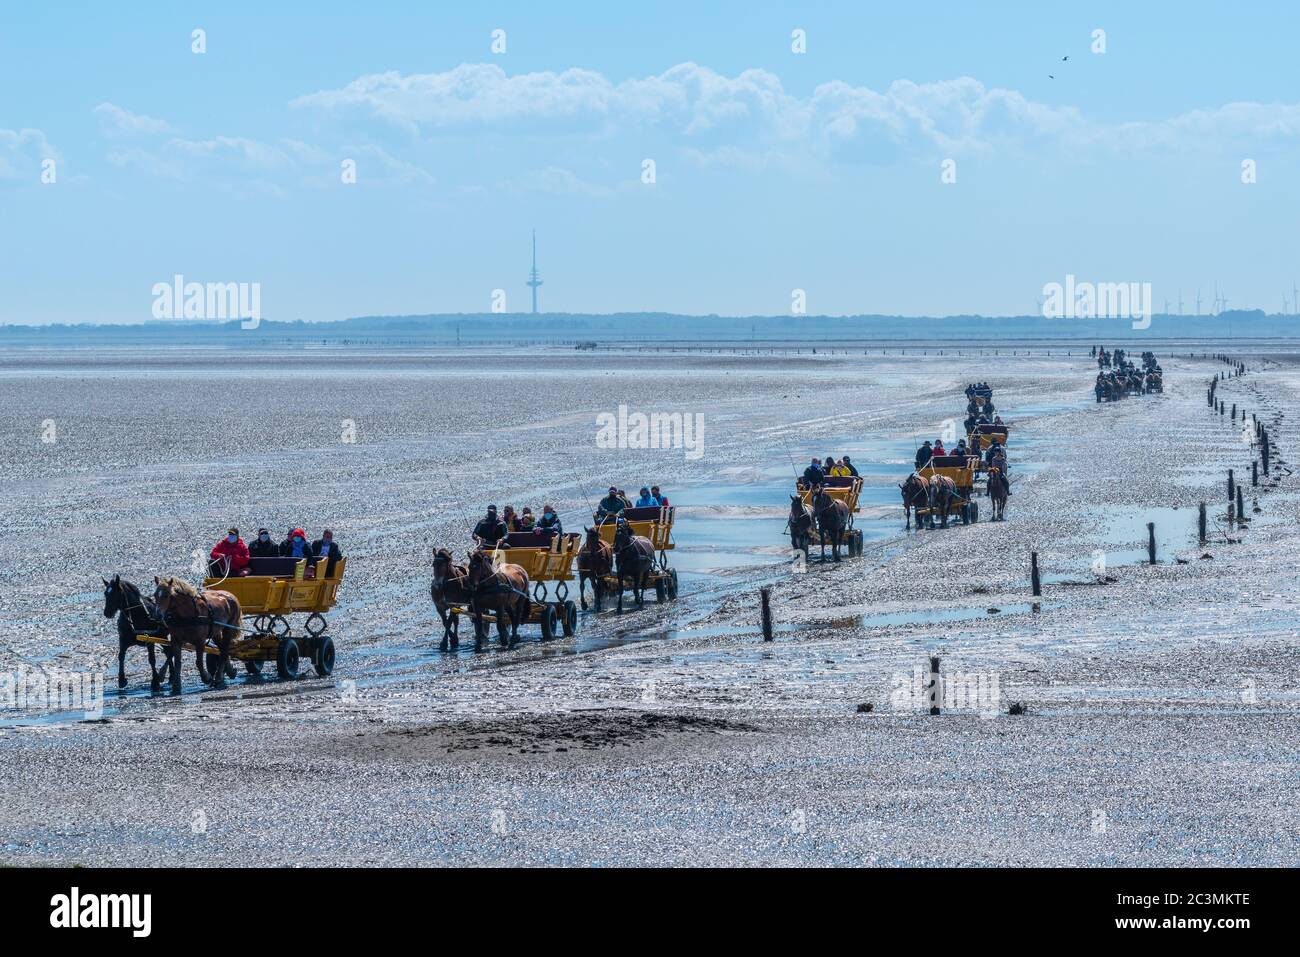 Horse-drawn carriages take tourists from the mainland to the North Sea island of Neuwerk, Federal State Hamburg, North Germany, UNESCO World heritage, Stock Photo